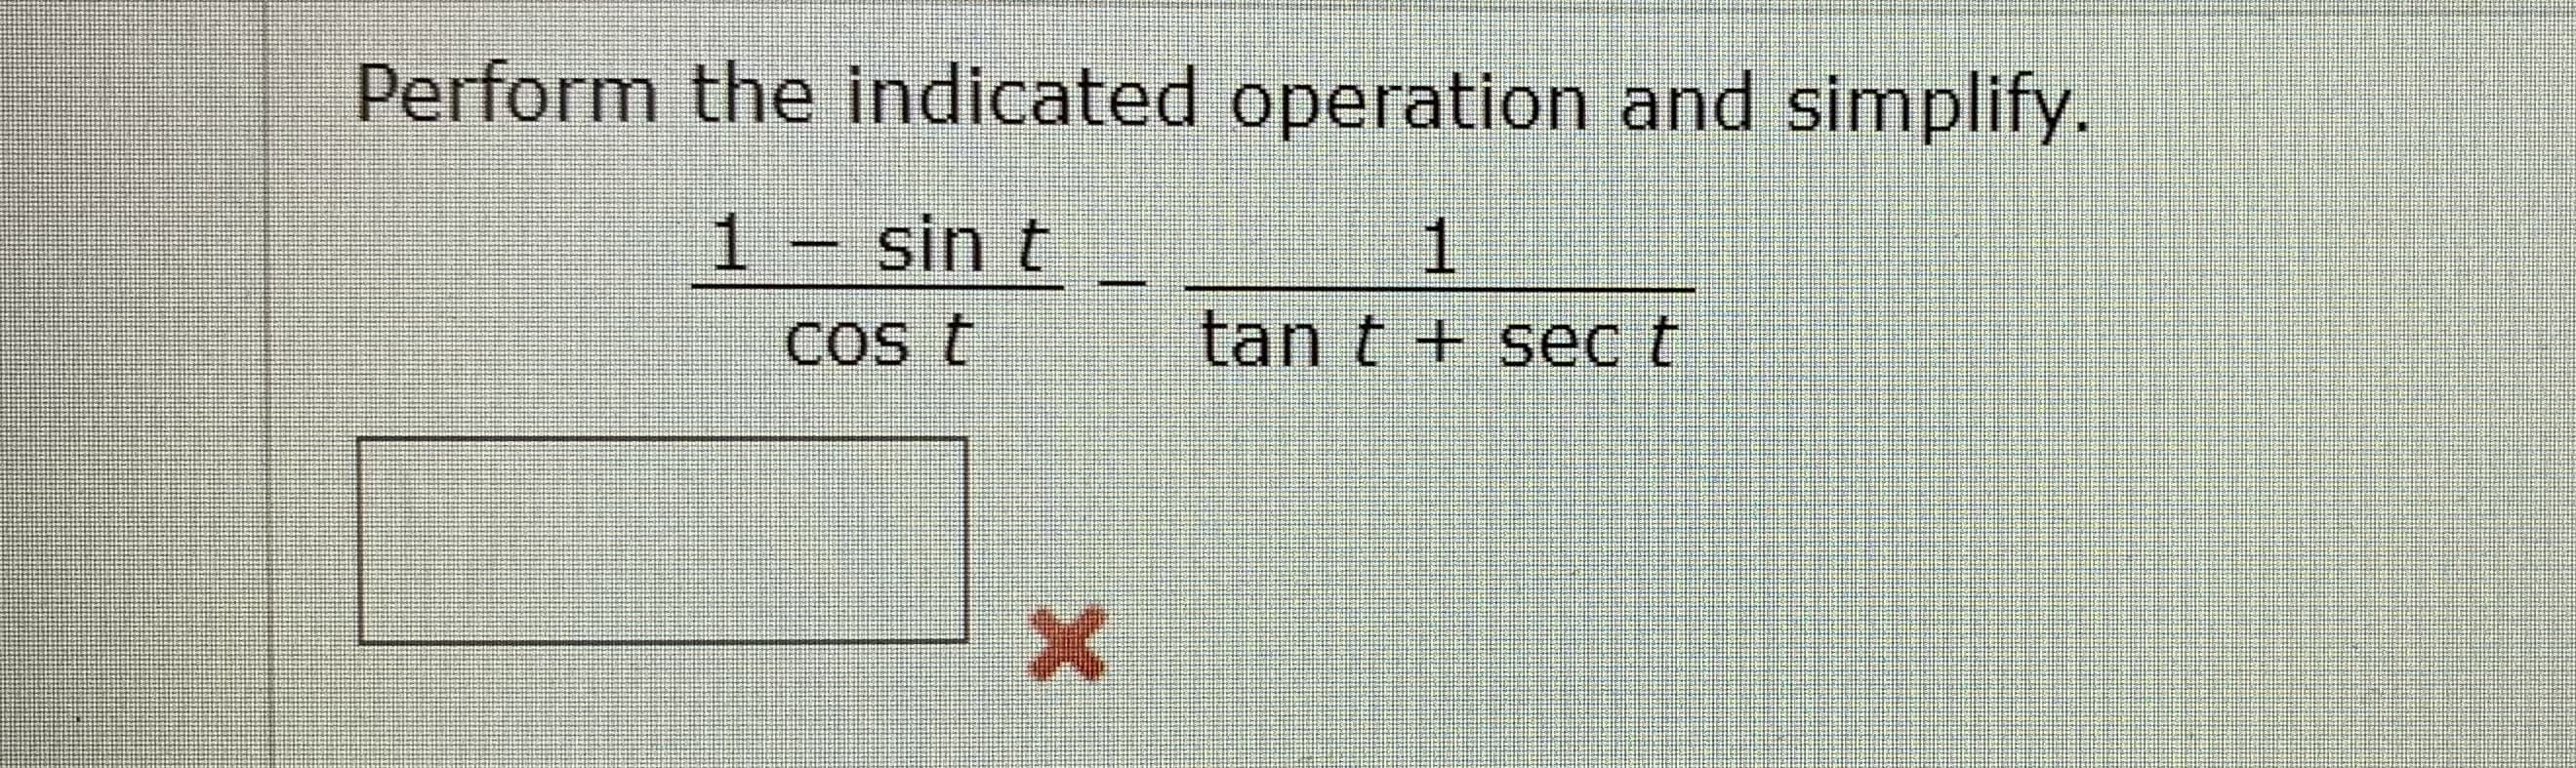 Perform the indicated operation and simplify.
1.
1 sin t
1
Cos t
tan t + sec t
